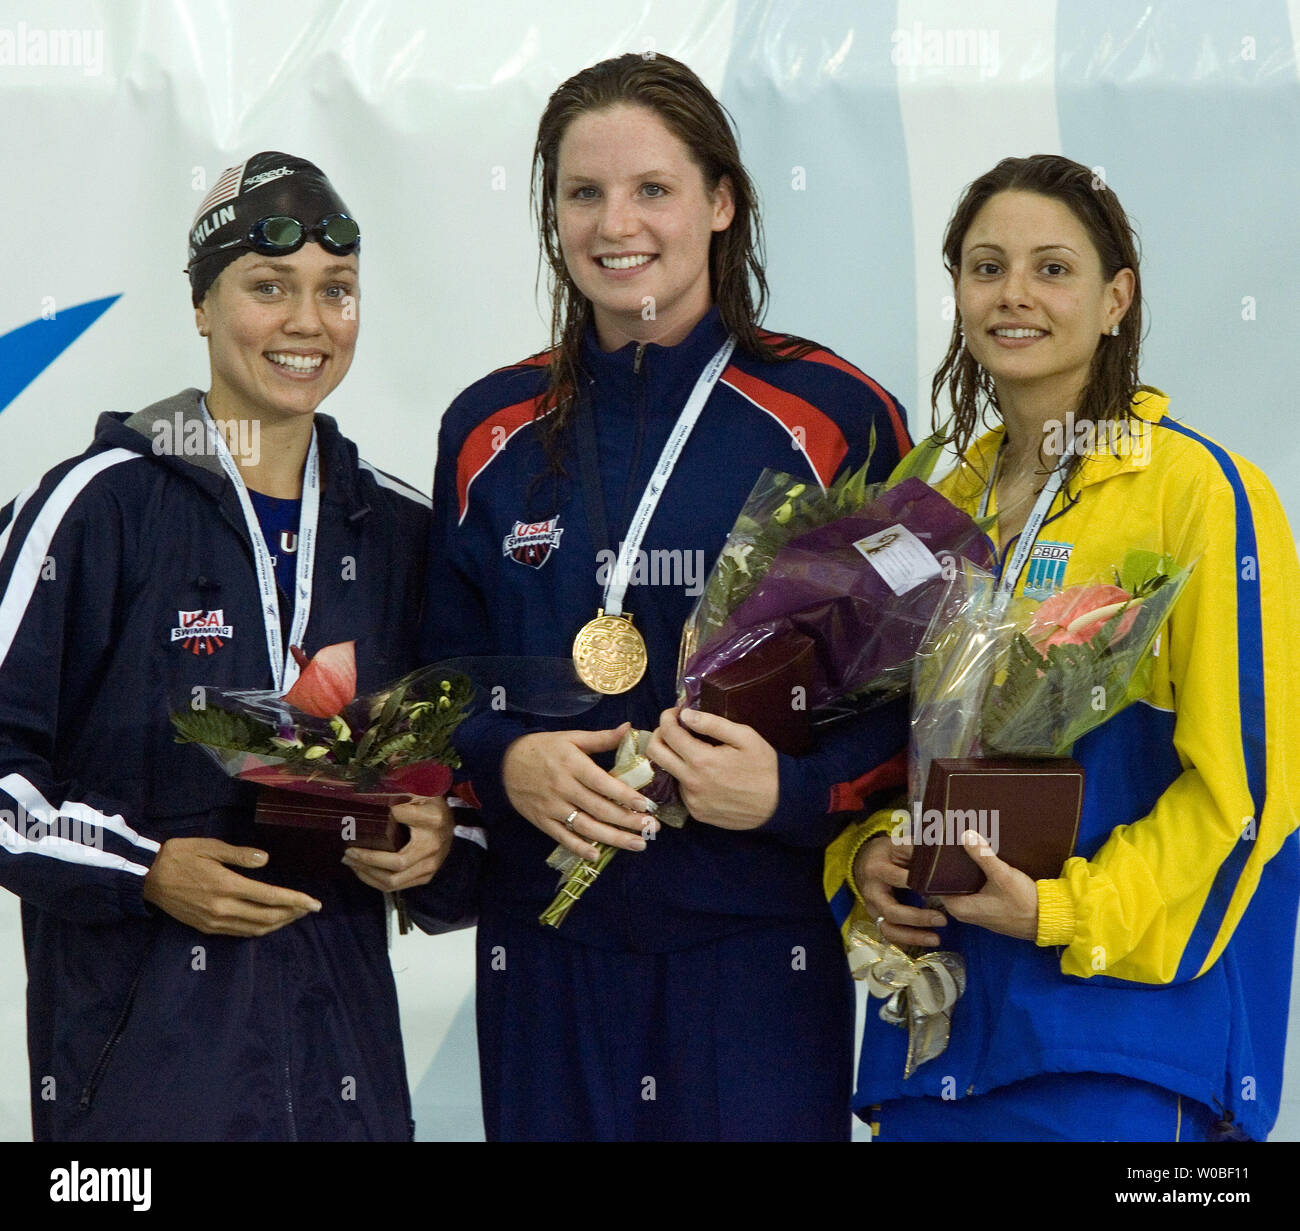 On the podium from left, Natalie Coughlin, USA, silver, Kara Lynn Joyce, USA, gold and Flavia Delaroli, BRA, bronze, receive their awards in the women's 500m freestyle swimming finals at the 2006 Pan Pacific Championships in Saanich Commonwealth Place, Victoria, British Columbia, August 20, 2006.  (UPI Photo/Heinz Ruckemann) Stock Photo